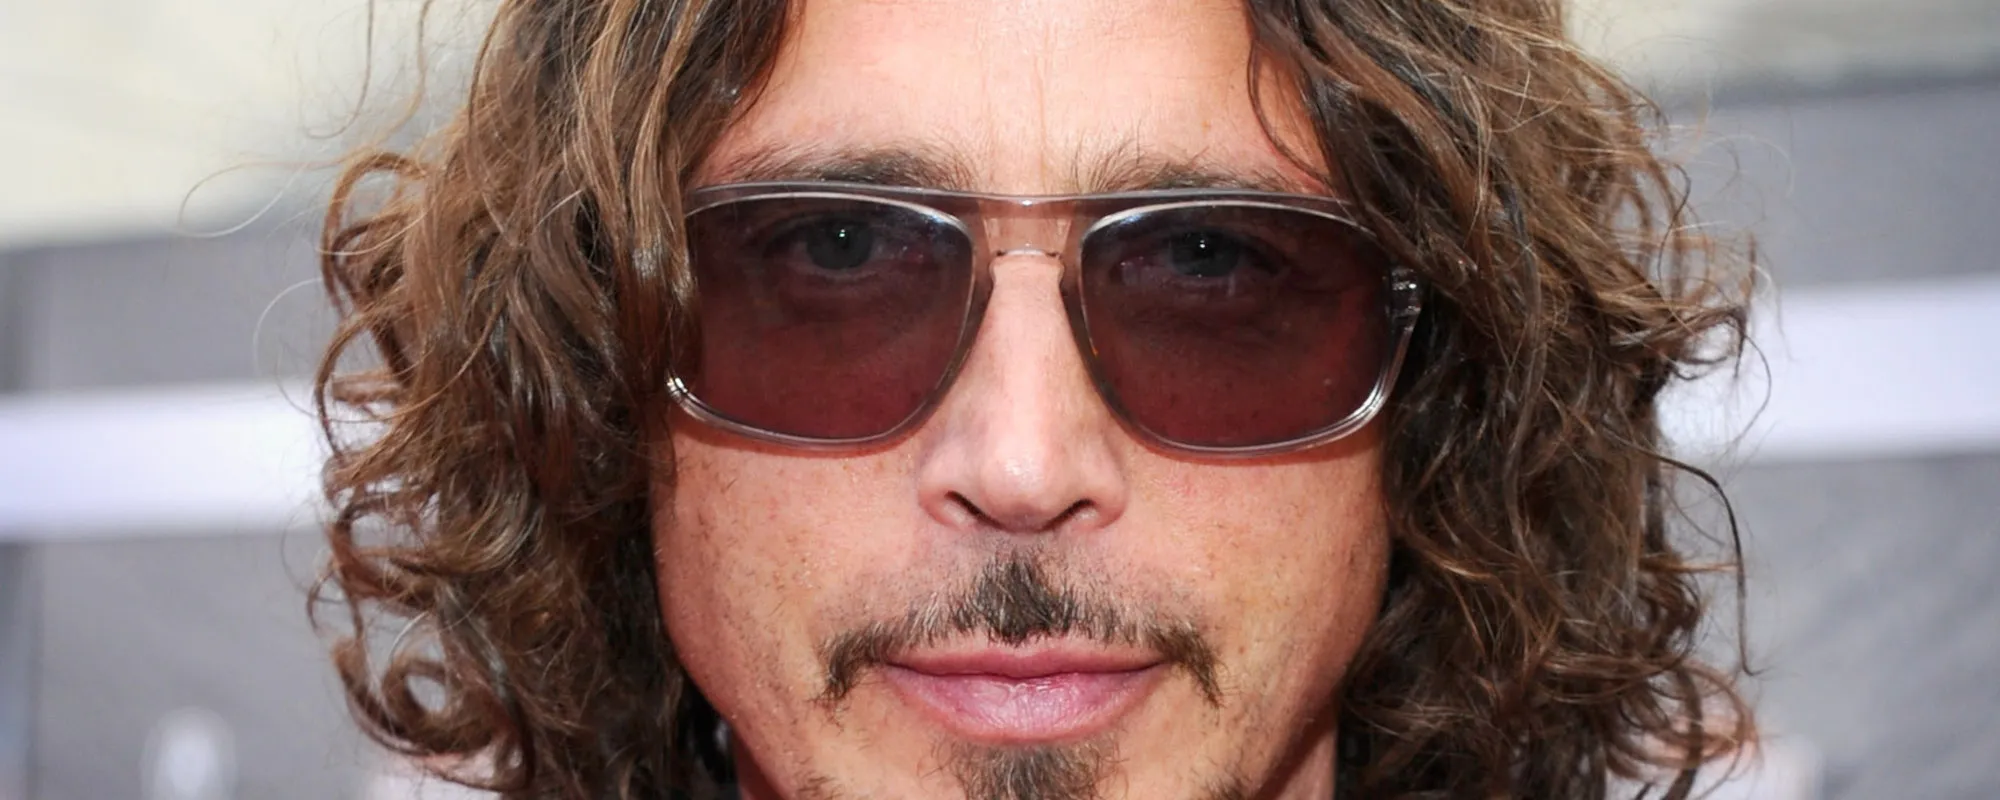 4 Songs You Didn’t Know Chris Cornell Wrote Solo for Soundgarden